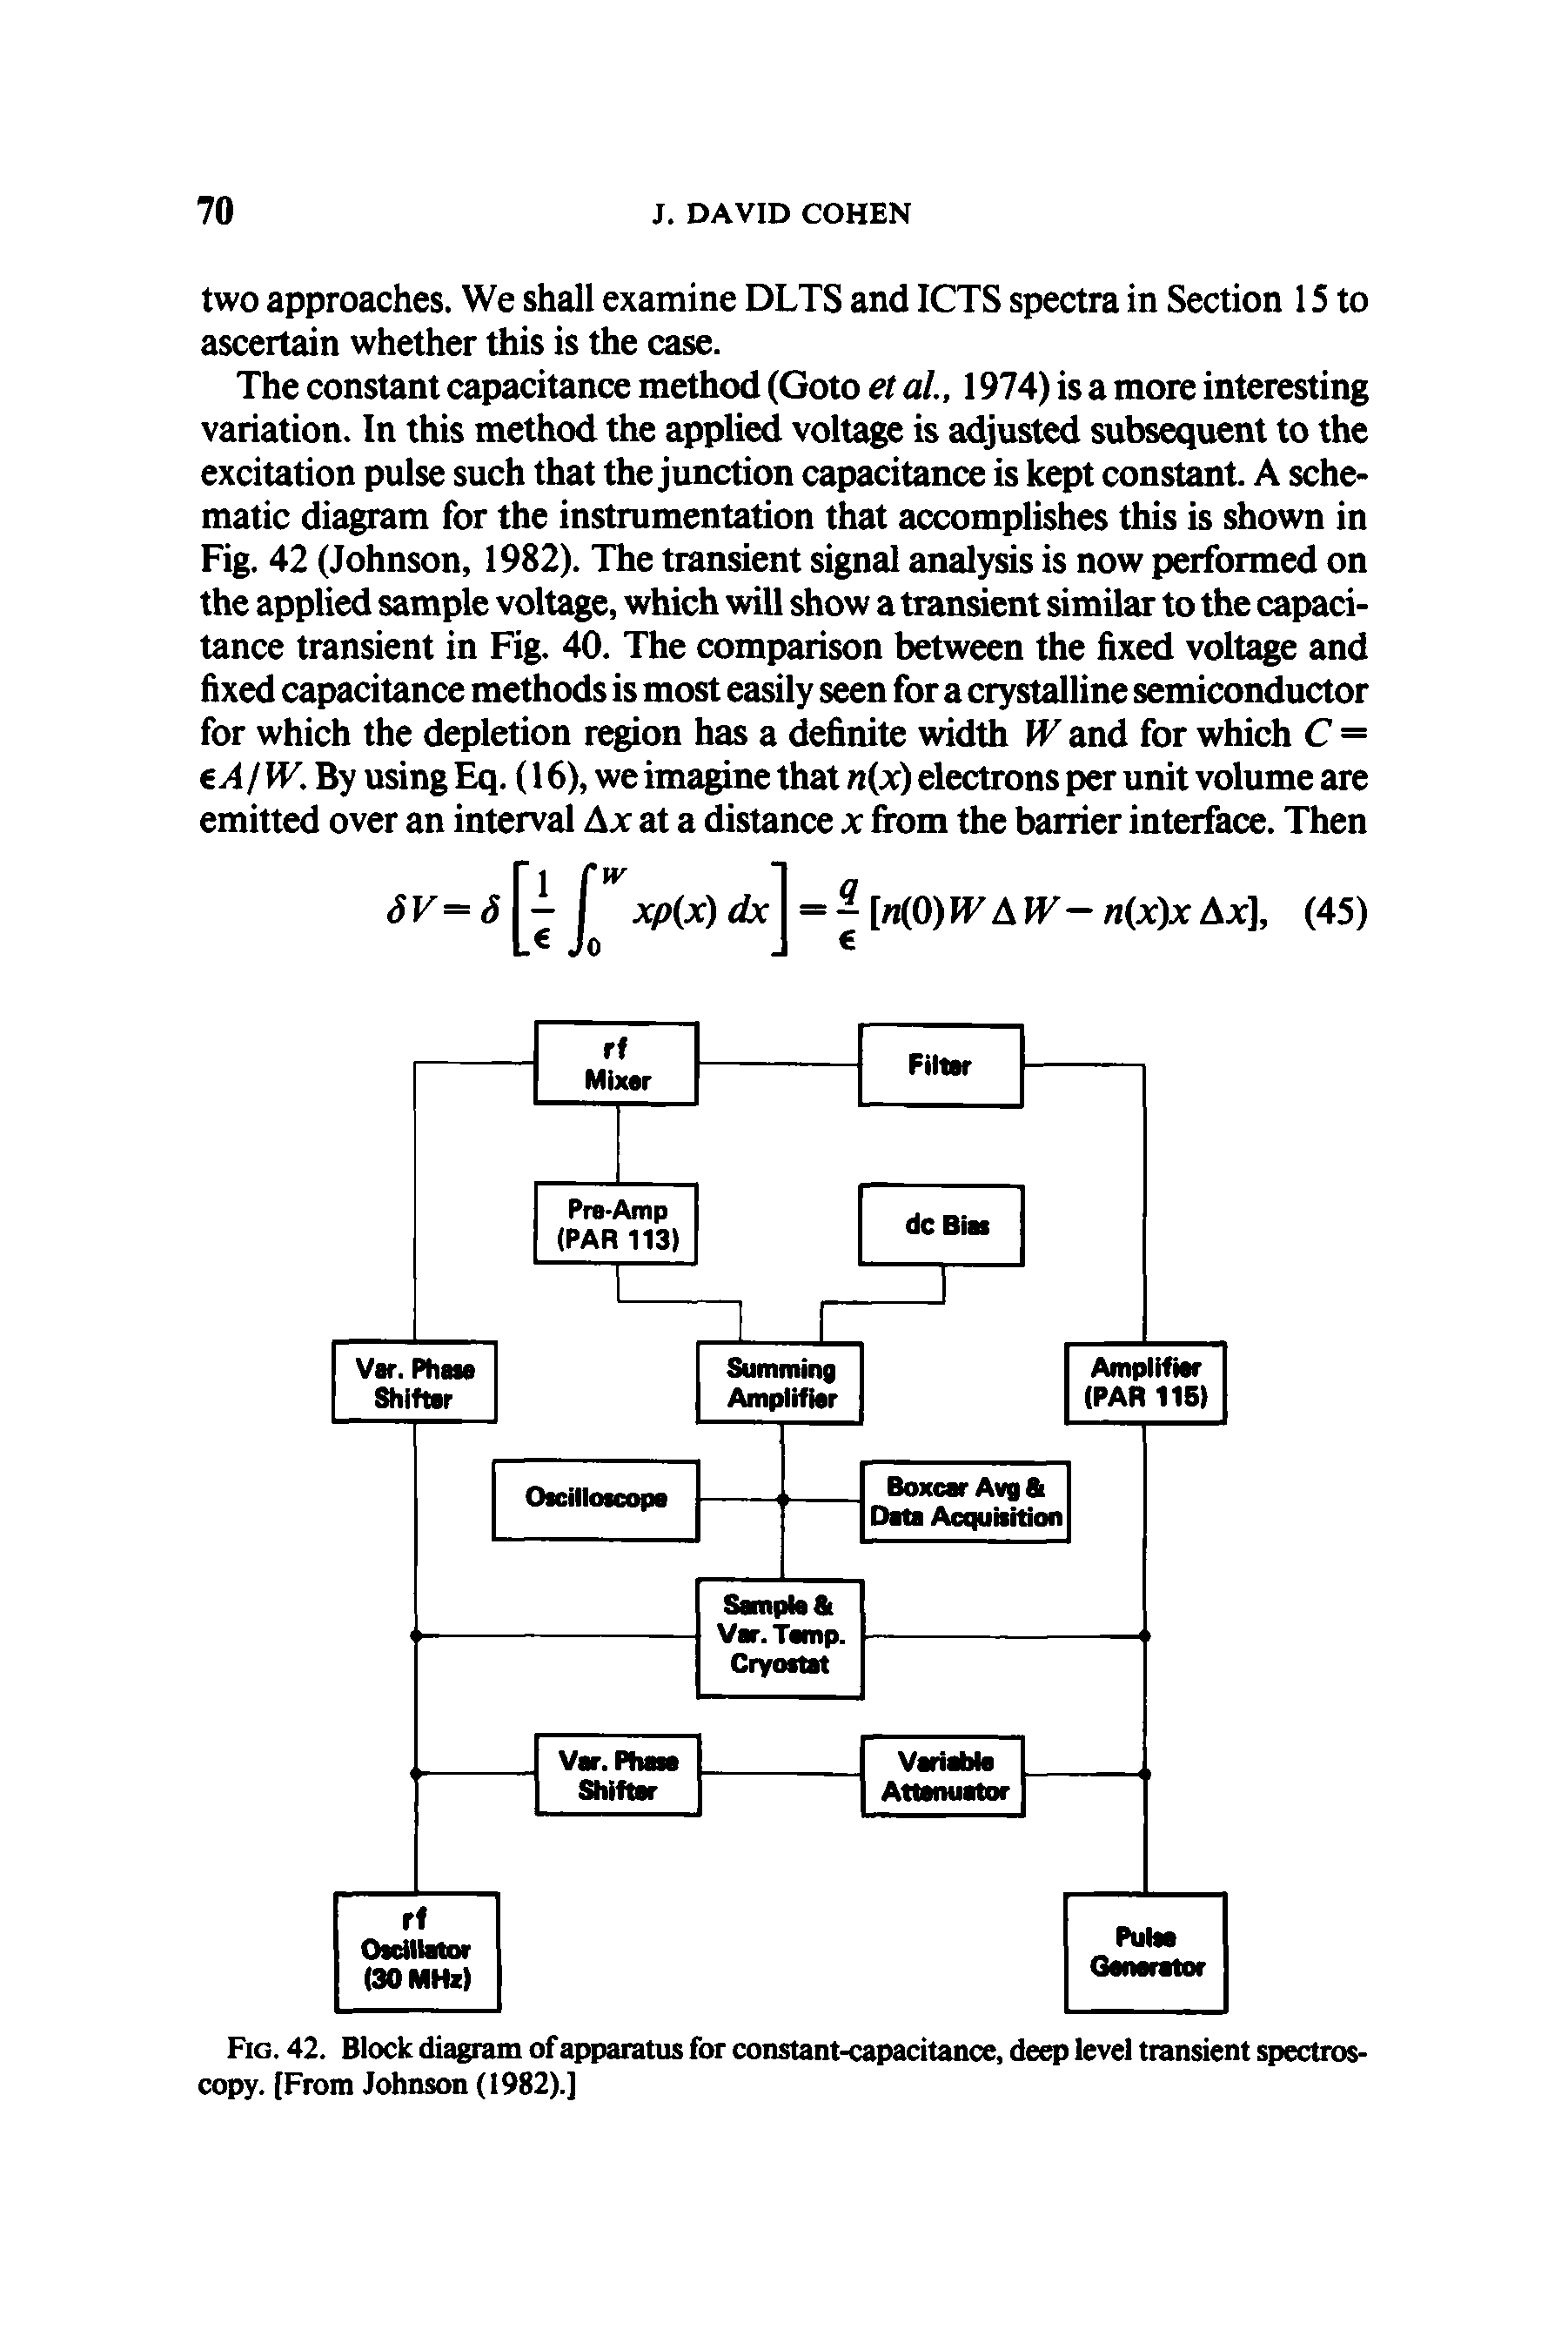 Fig. 42. Block diagram of apparatus for constant-capacitance, deep level transient spectroscopy. [From Johnson (1982).]...